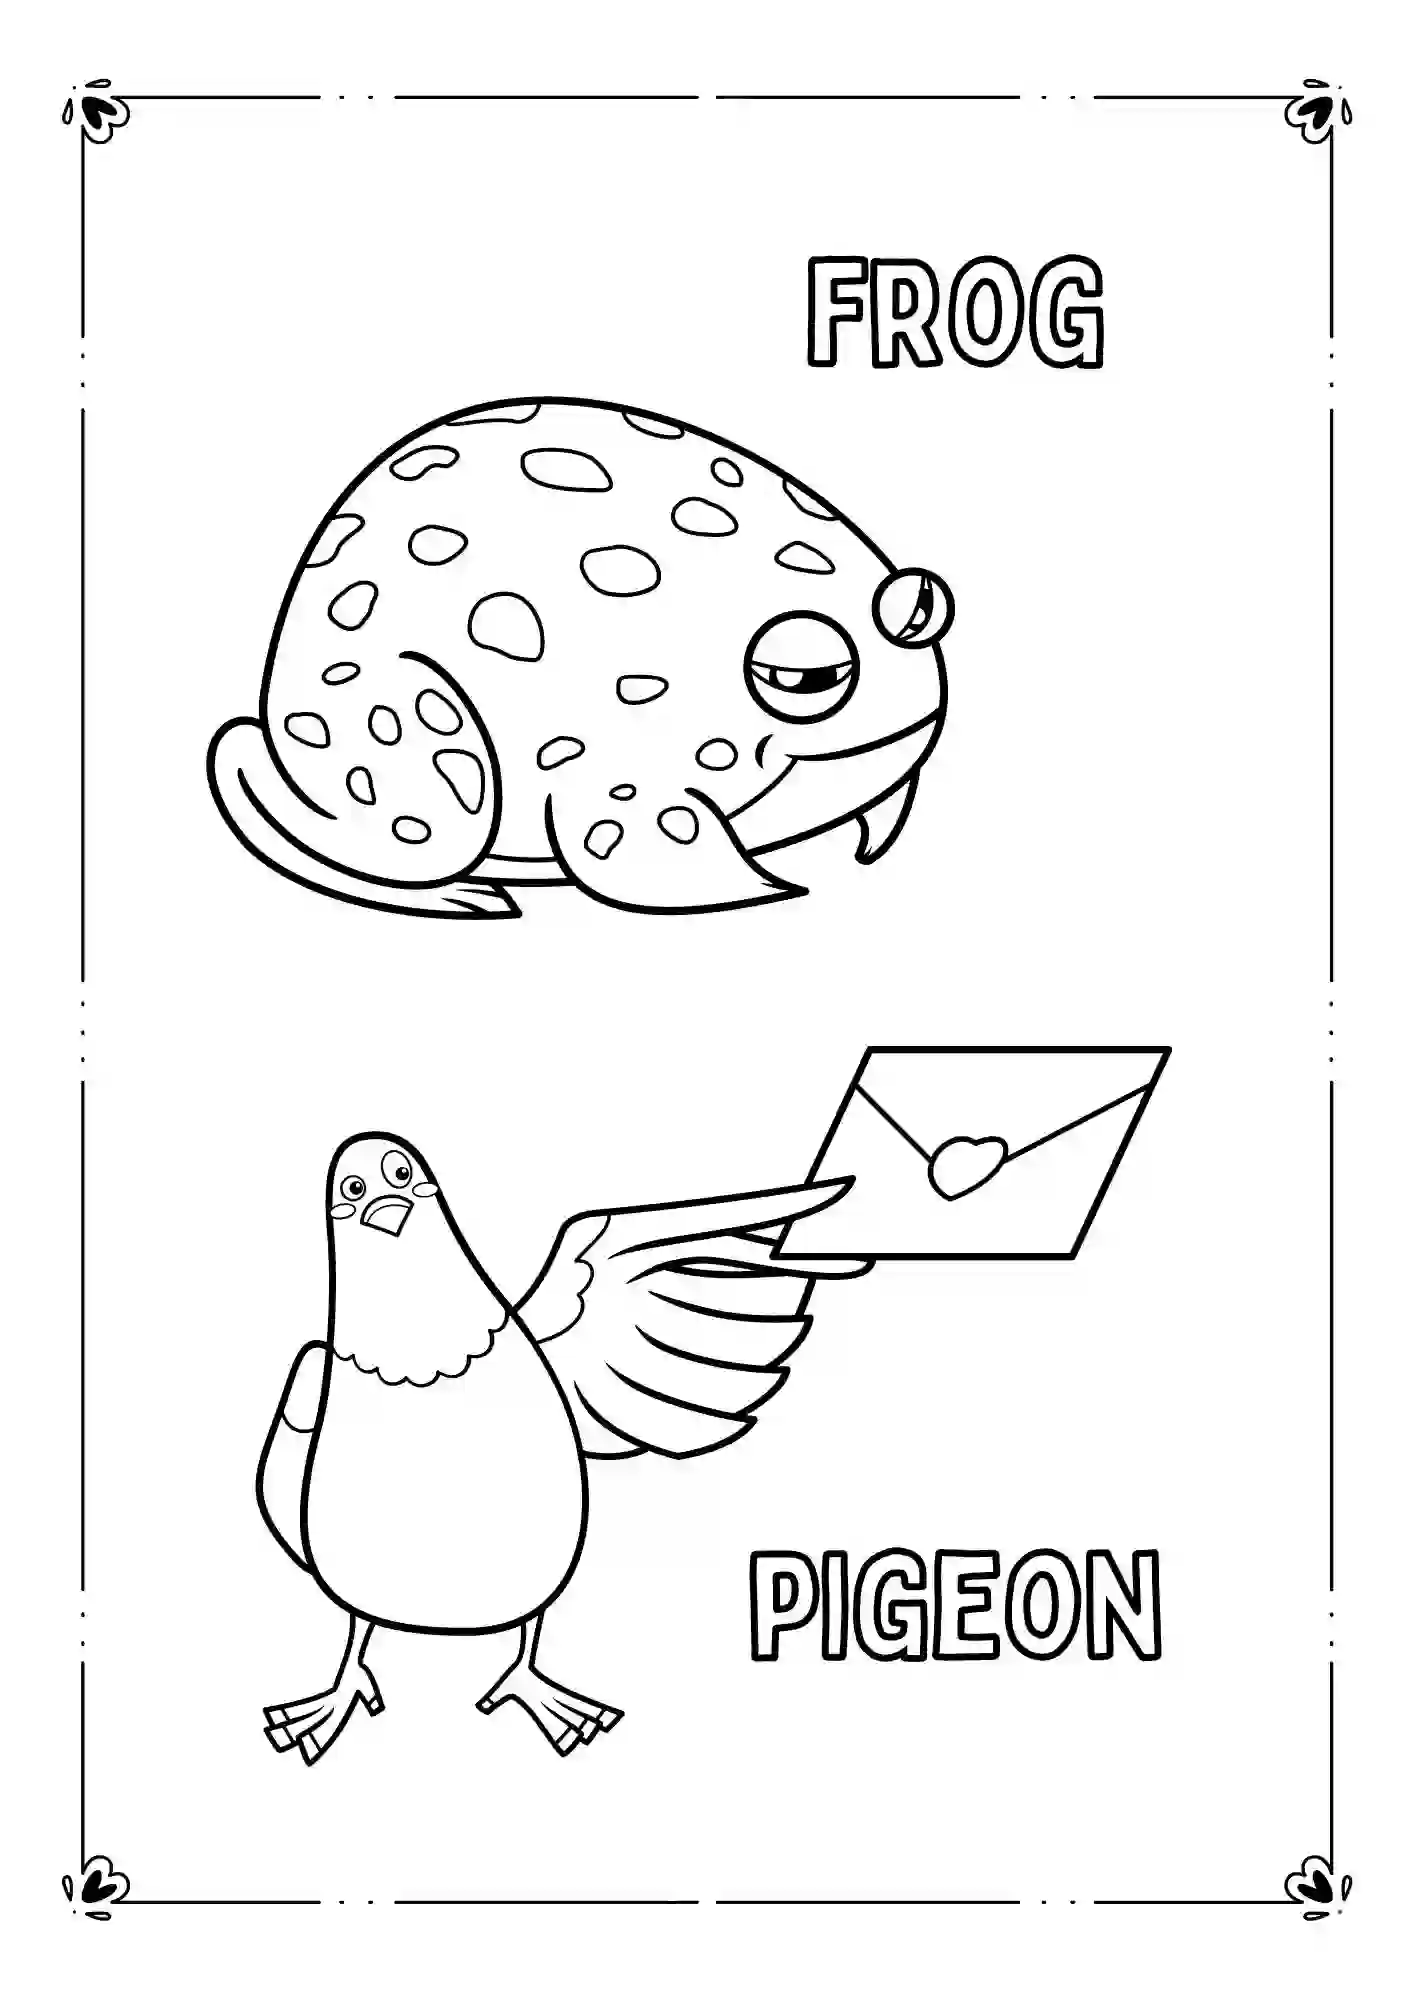 Farm Animals Coloring Worksheets (FROG & PIGEON)